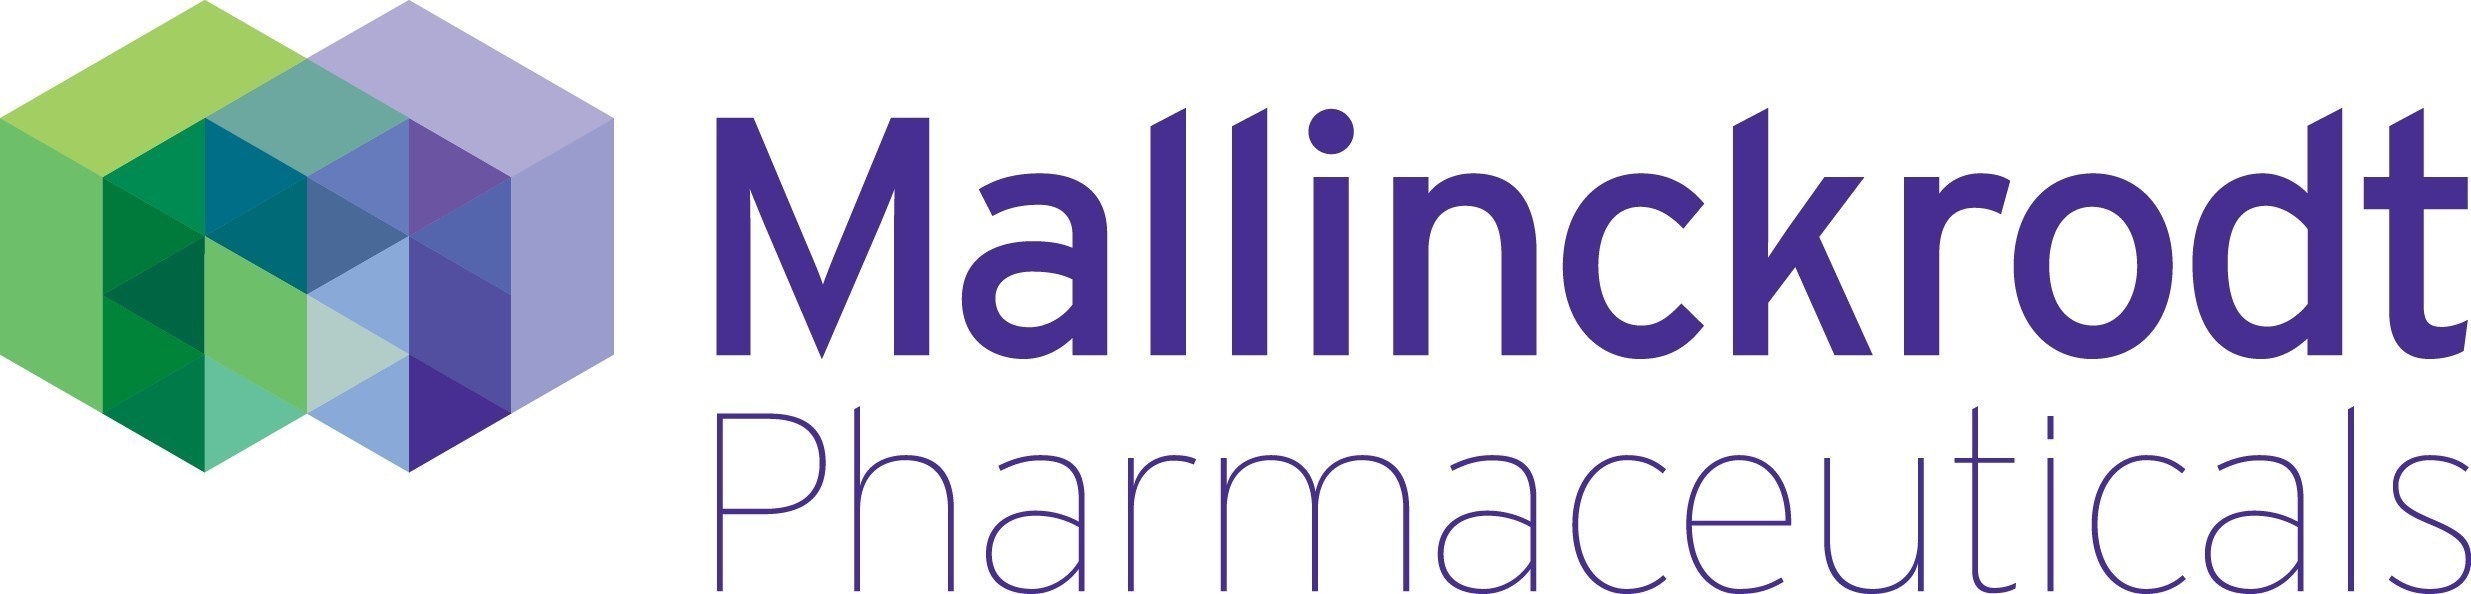 Mallinckrodt Completes Sale of BioVectra Inc. for up to $250 Million